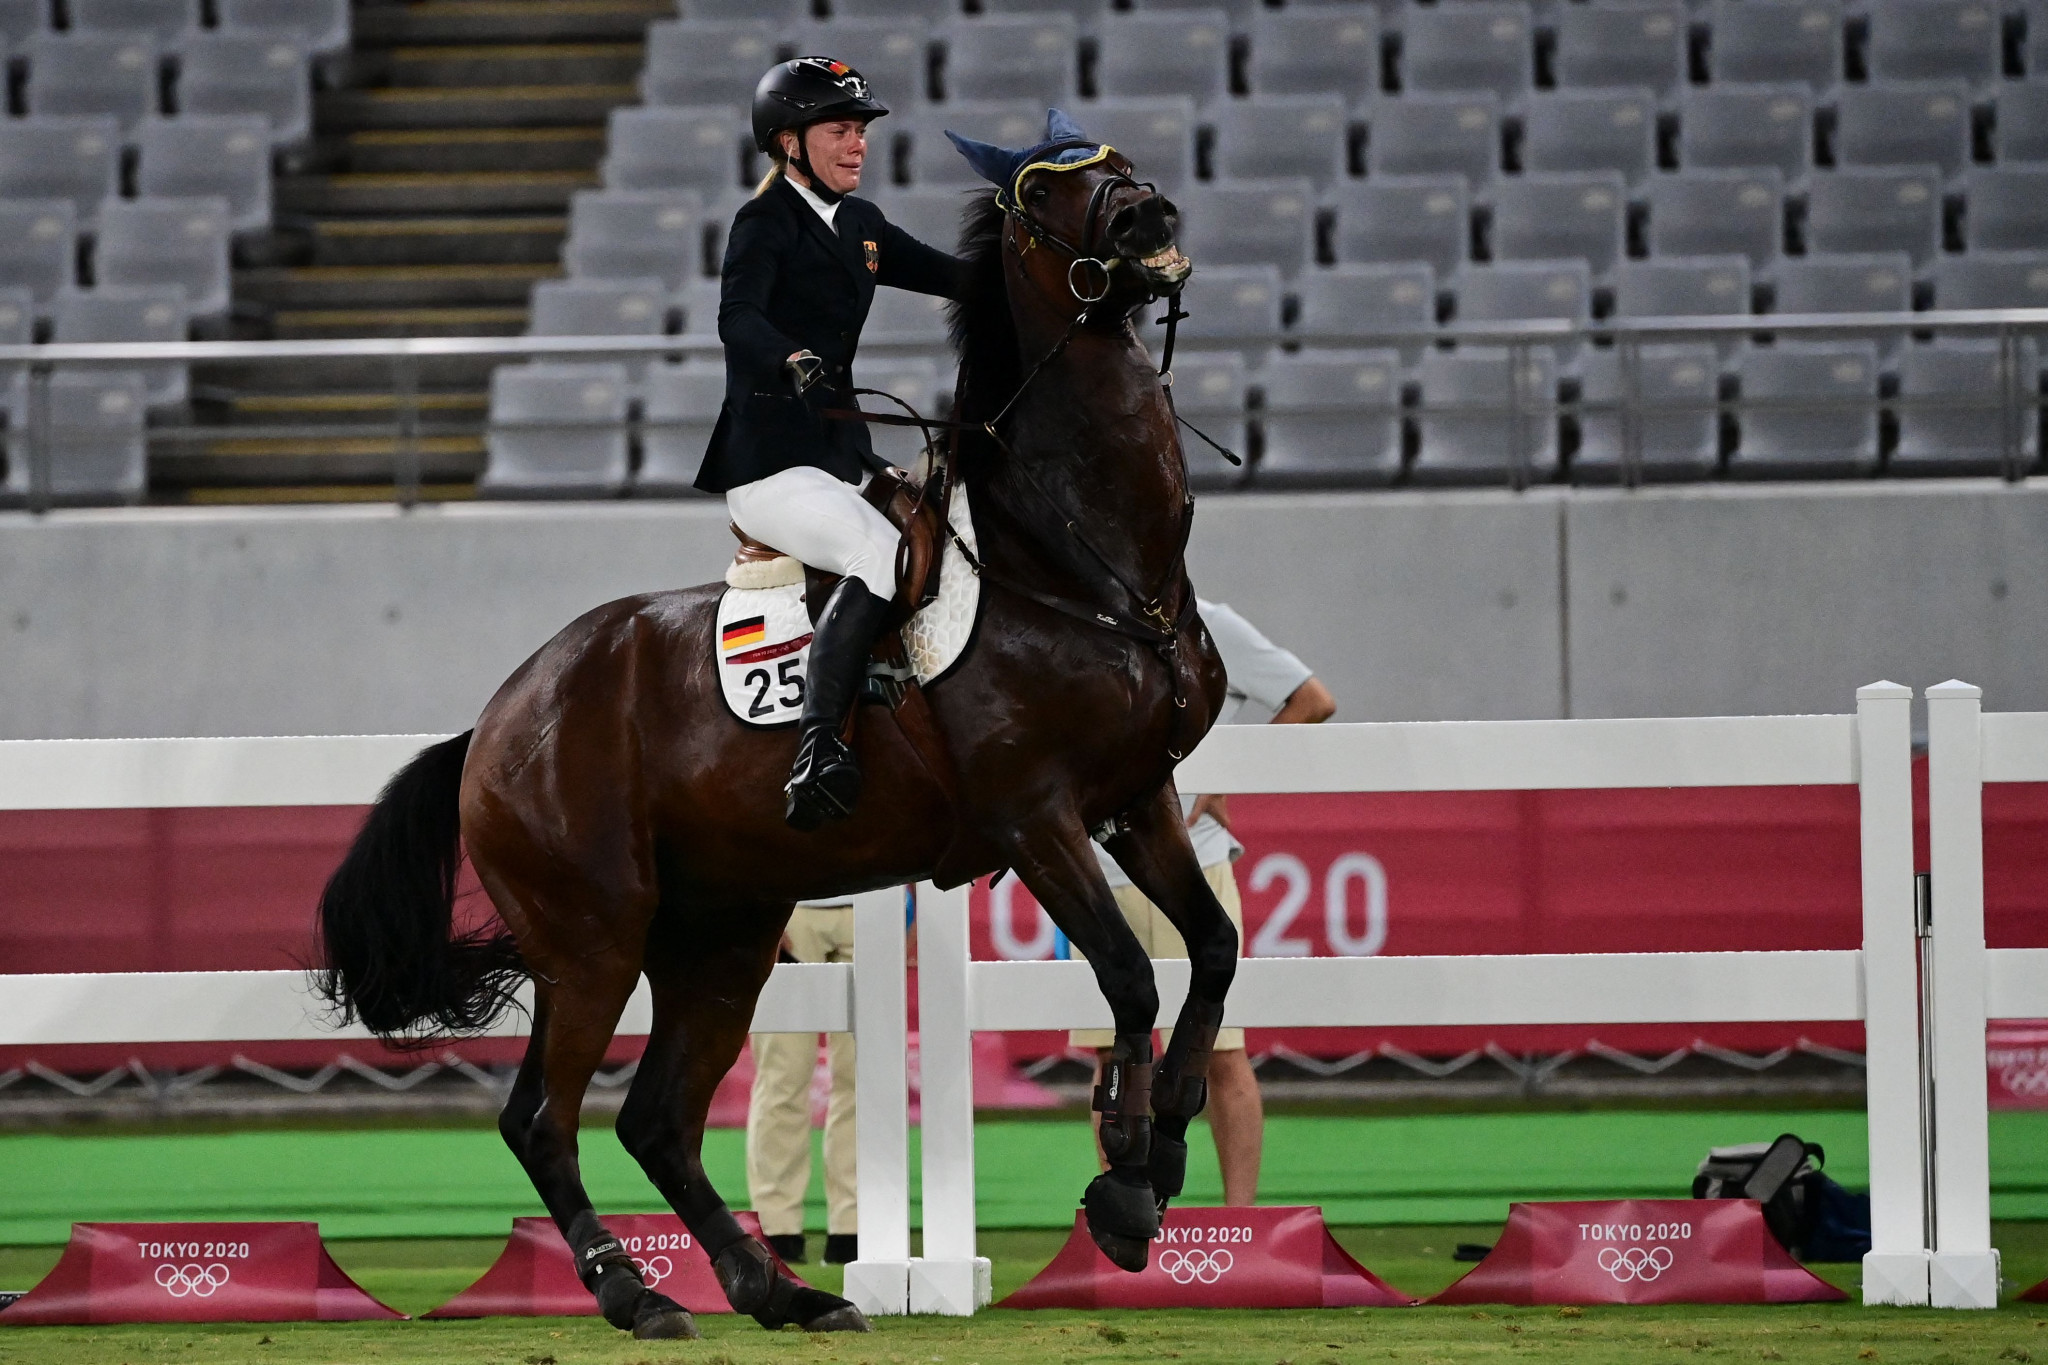 The scandal involving the horse Saint Boy at Tokyo 2020 was widely condemned and damaged modern pentathlon's image ©Getty Images